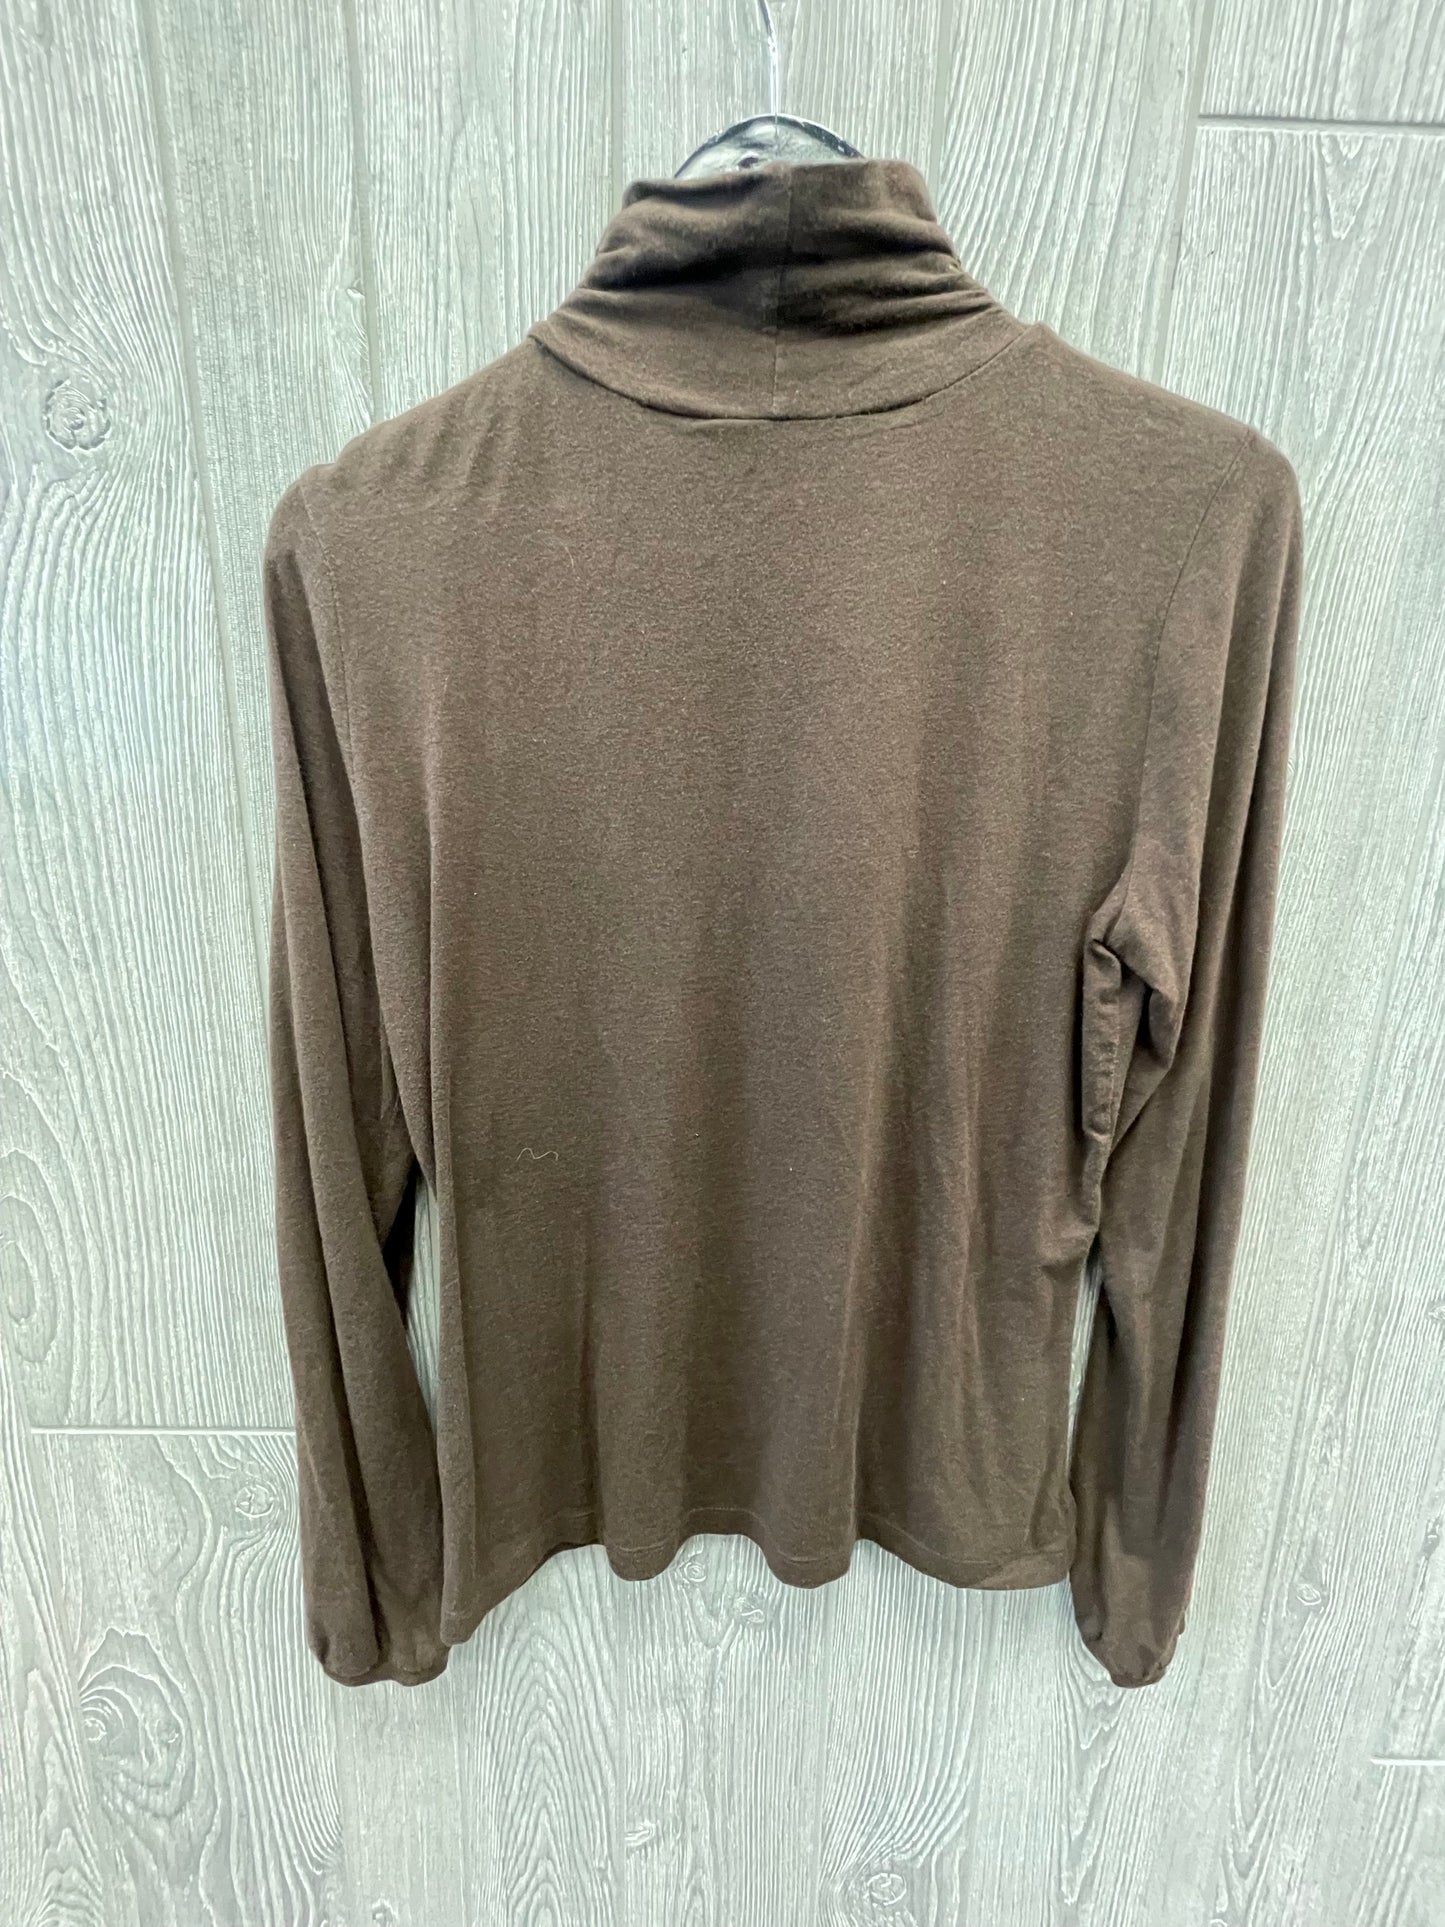 Brown Top Long Sleeve Ana, Size M